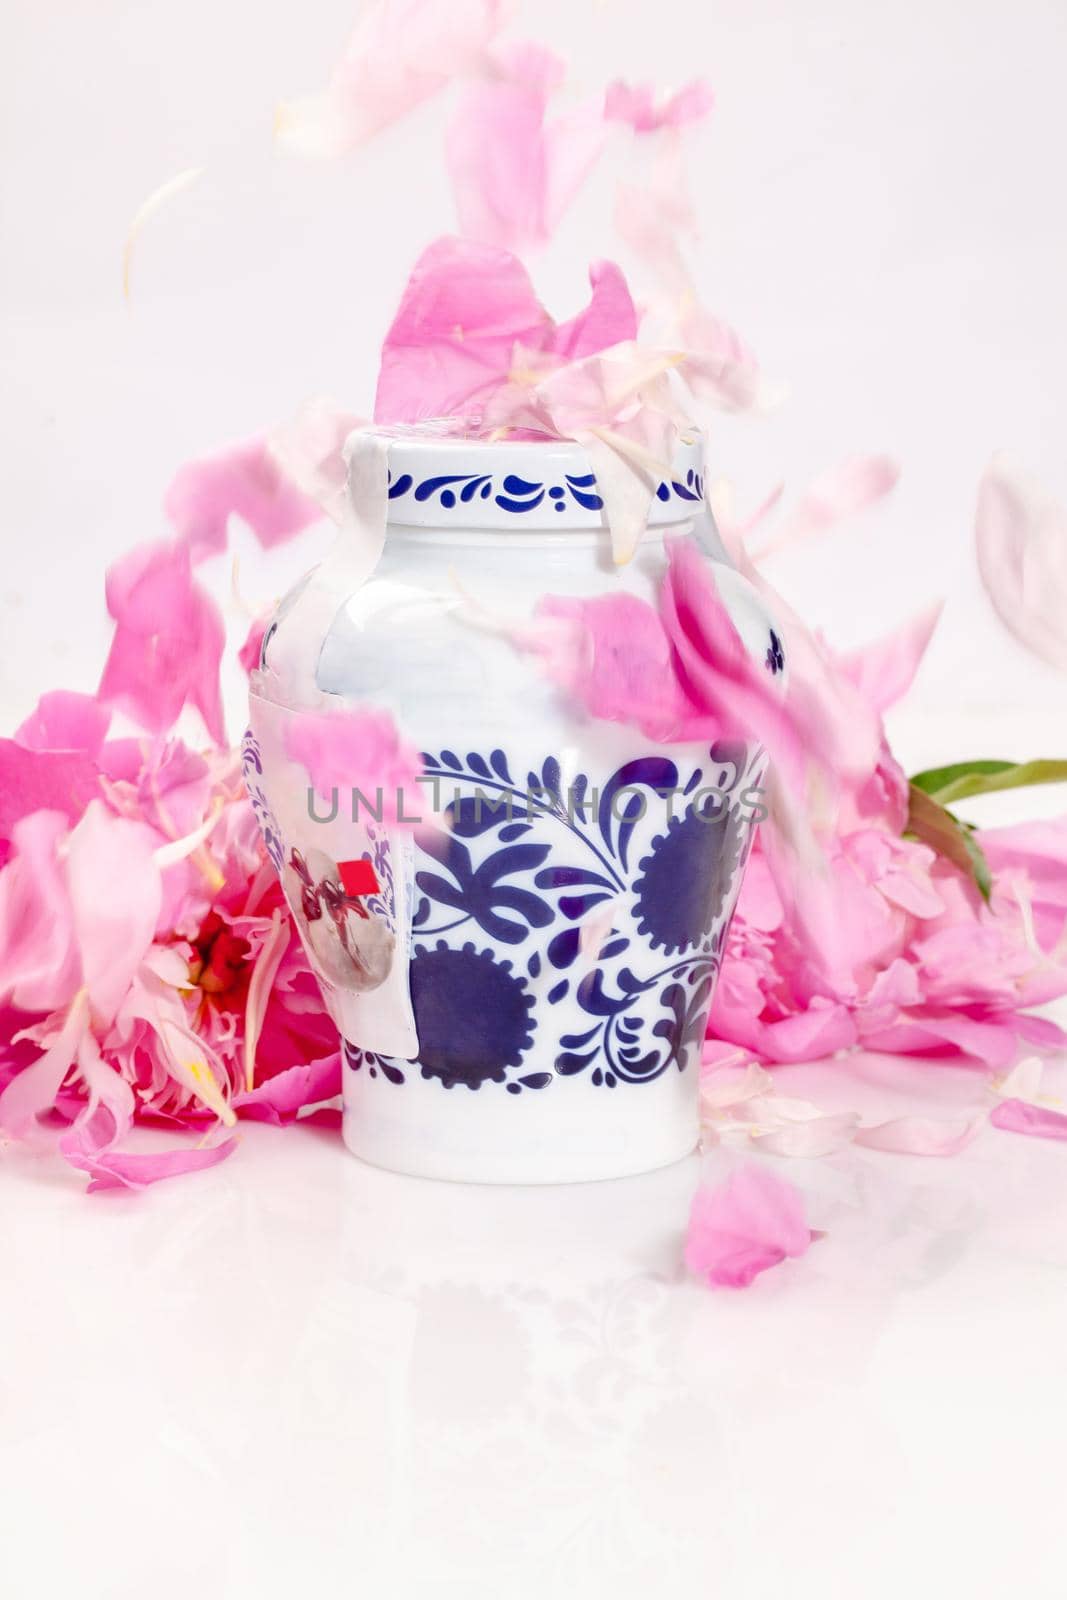 Decorative jar with blue floral patterns sprinkled with pink peony petals on white background. Packaging for storing food or cosmetics